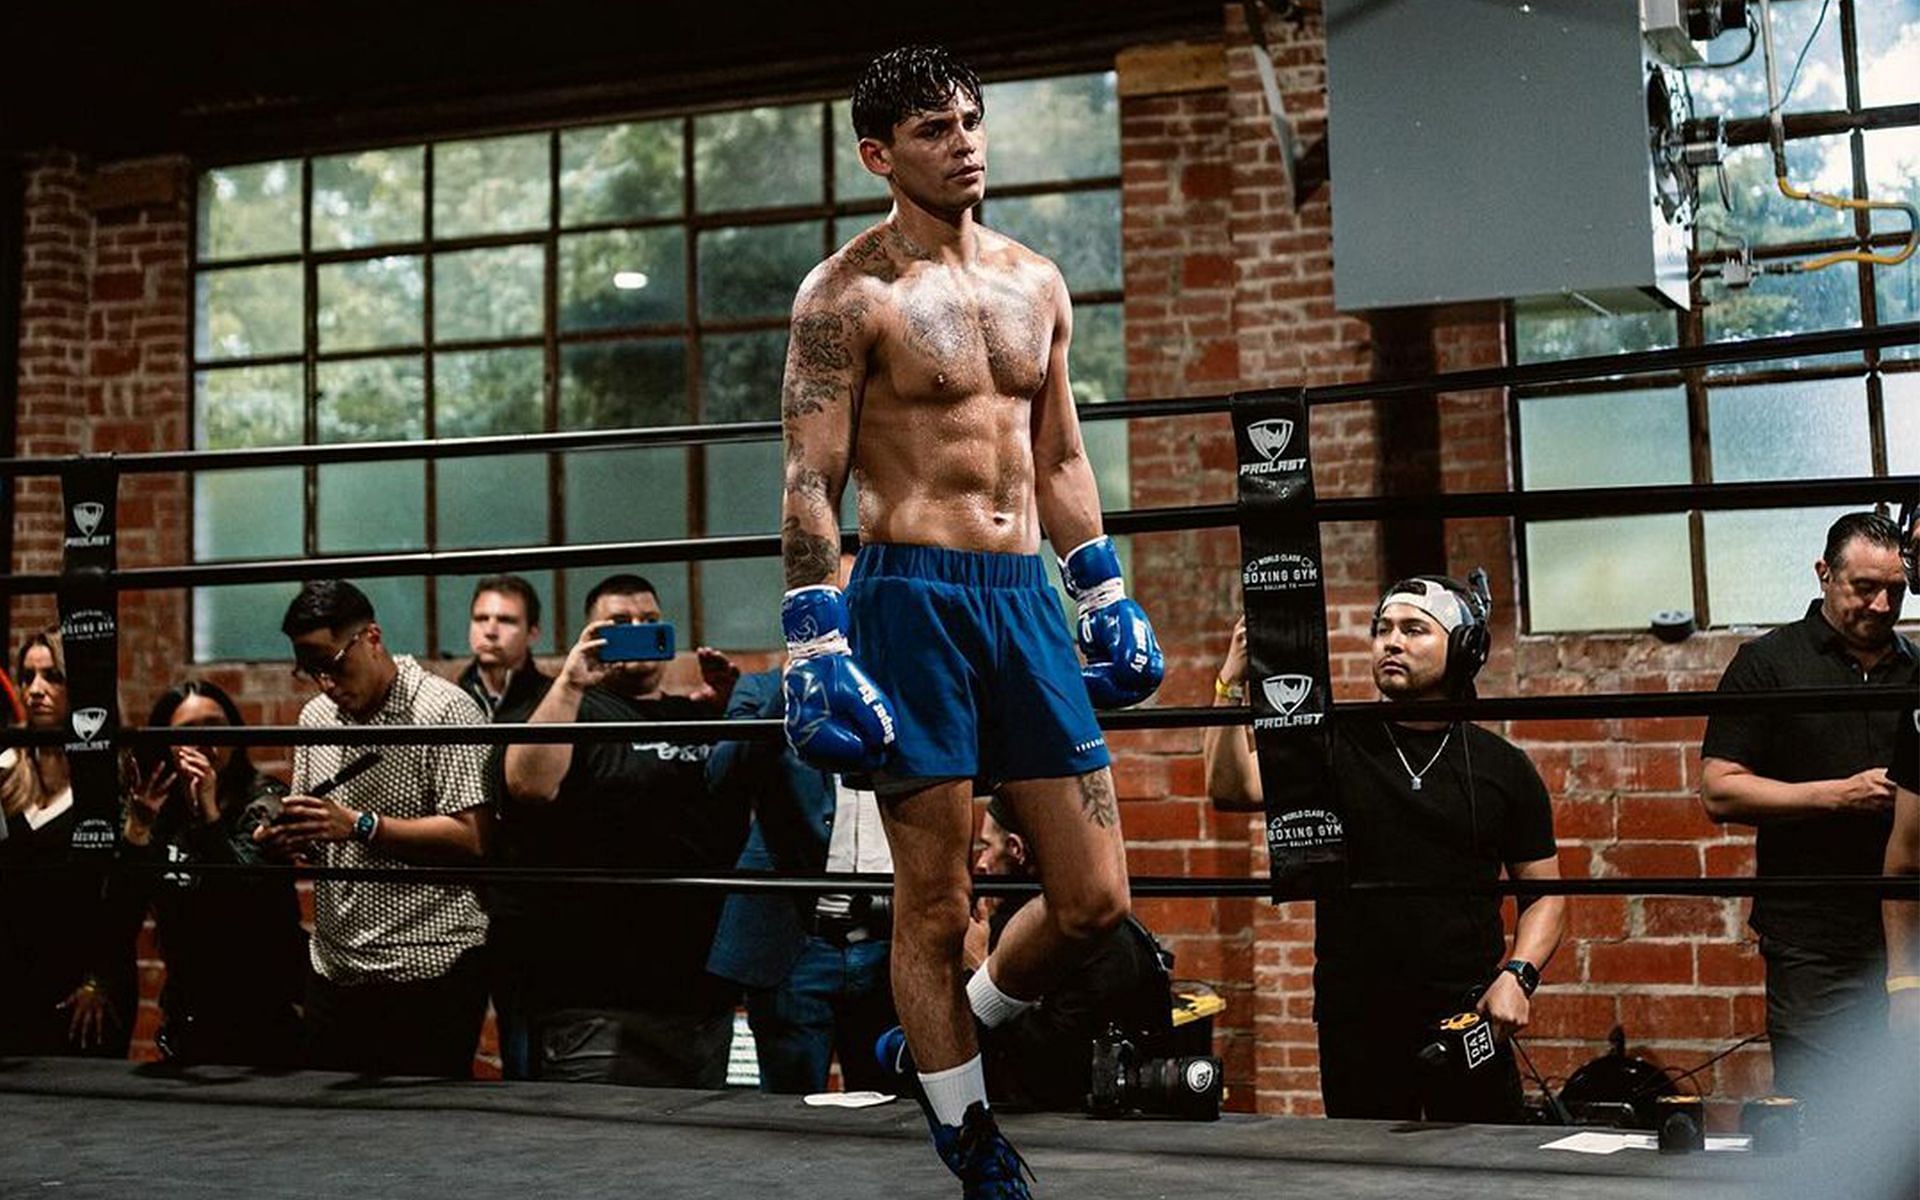 Ryan Garcia is one of the most promising young boxing stars [Image Courtesy: @kingryan Instagram]